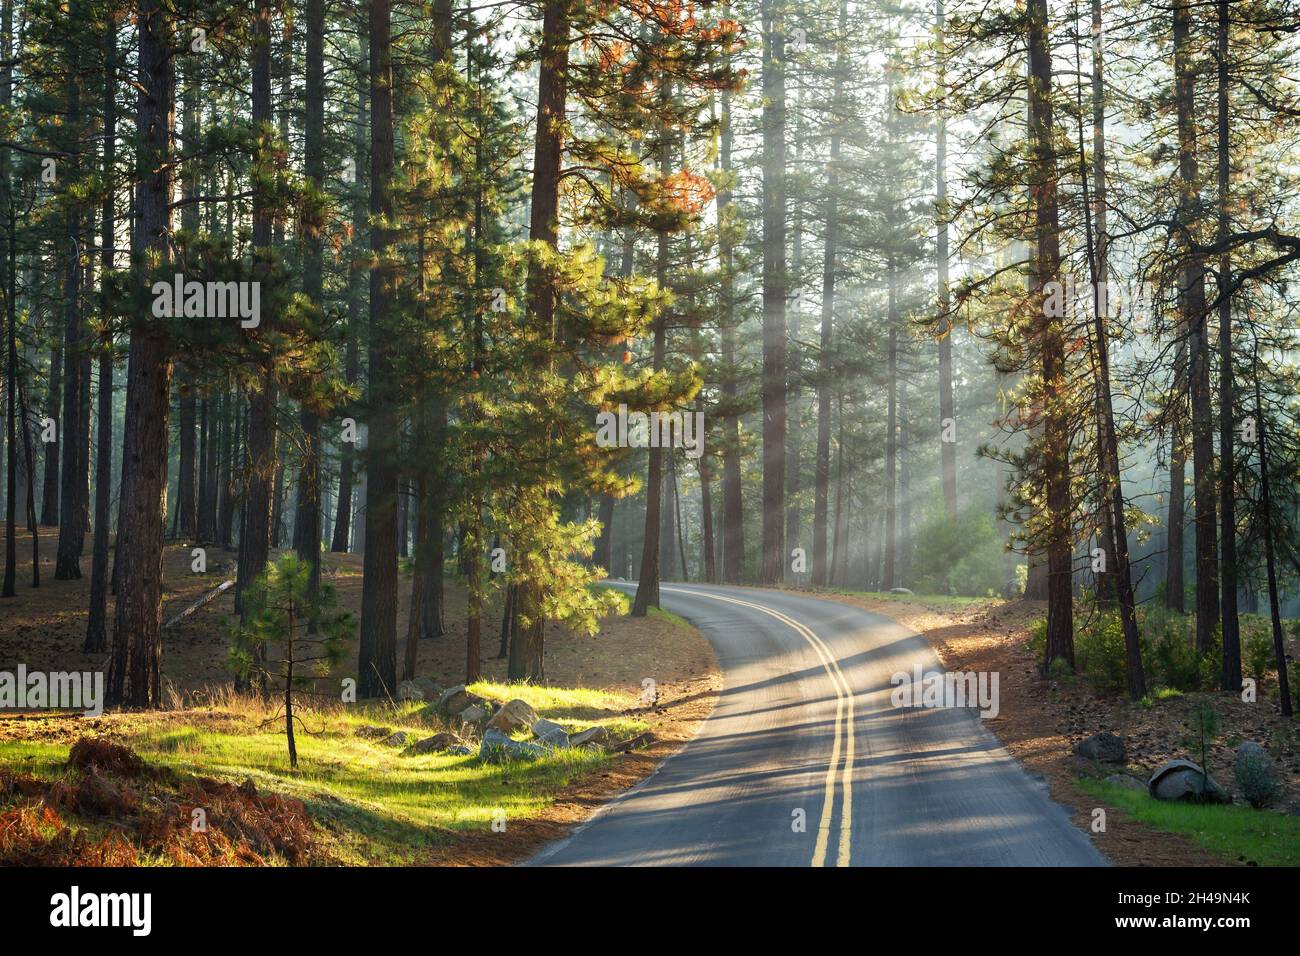 Road through a sunlit pine forest, Yosemite, USA Stock Photo